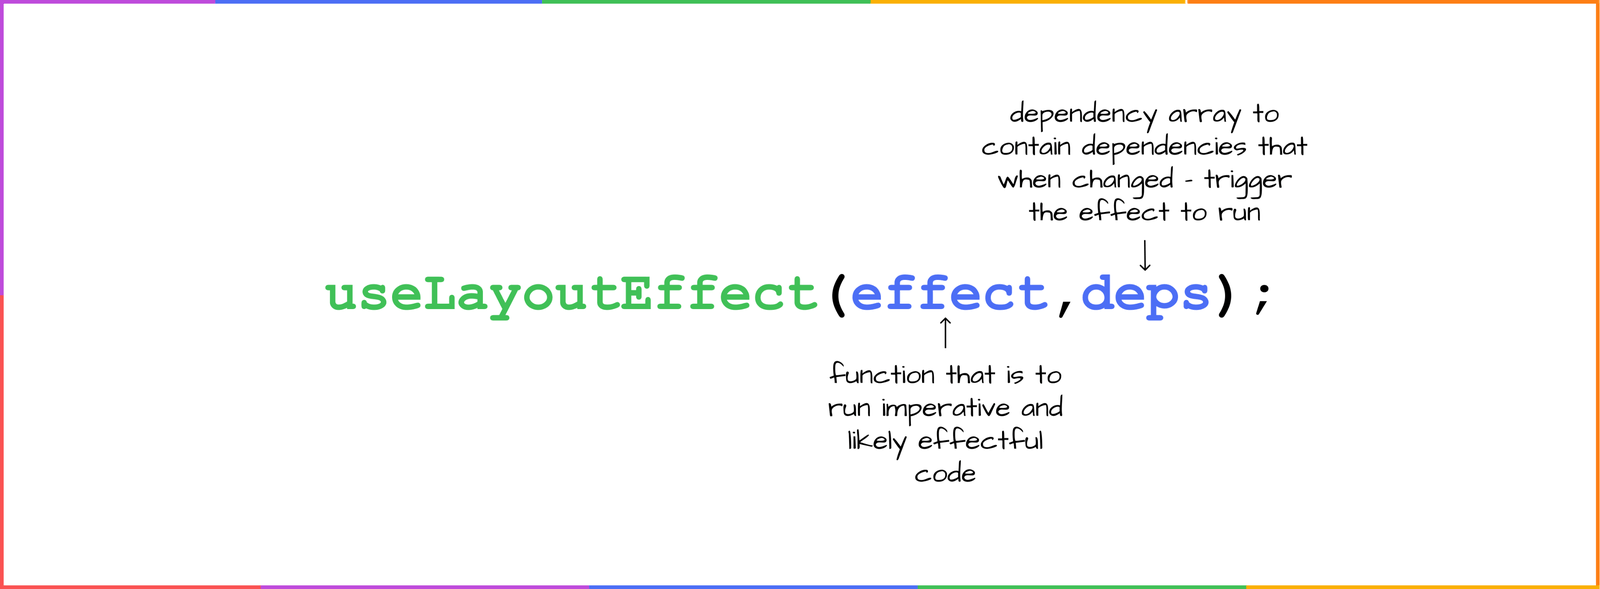 useLayoutEffect(effect,deps); - effect is the function that is to run imperative and likely effectful code. deps is the dependency array to contain dependencies that when changed trigger the effect to run